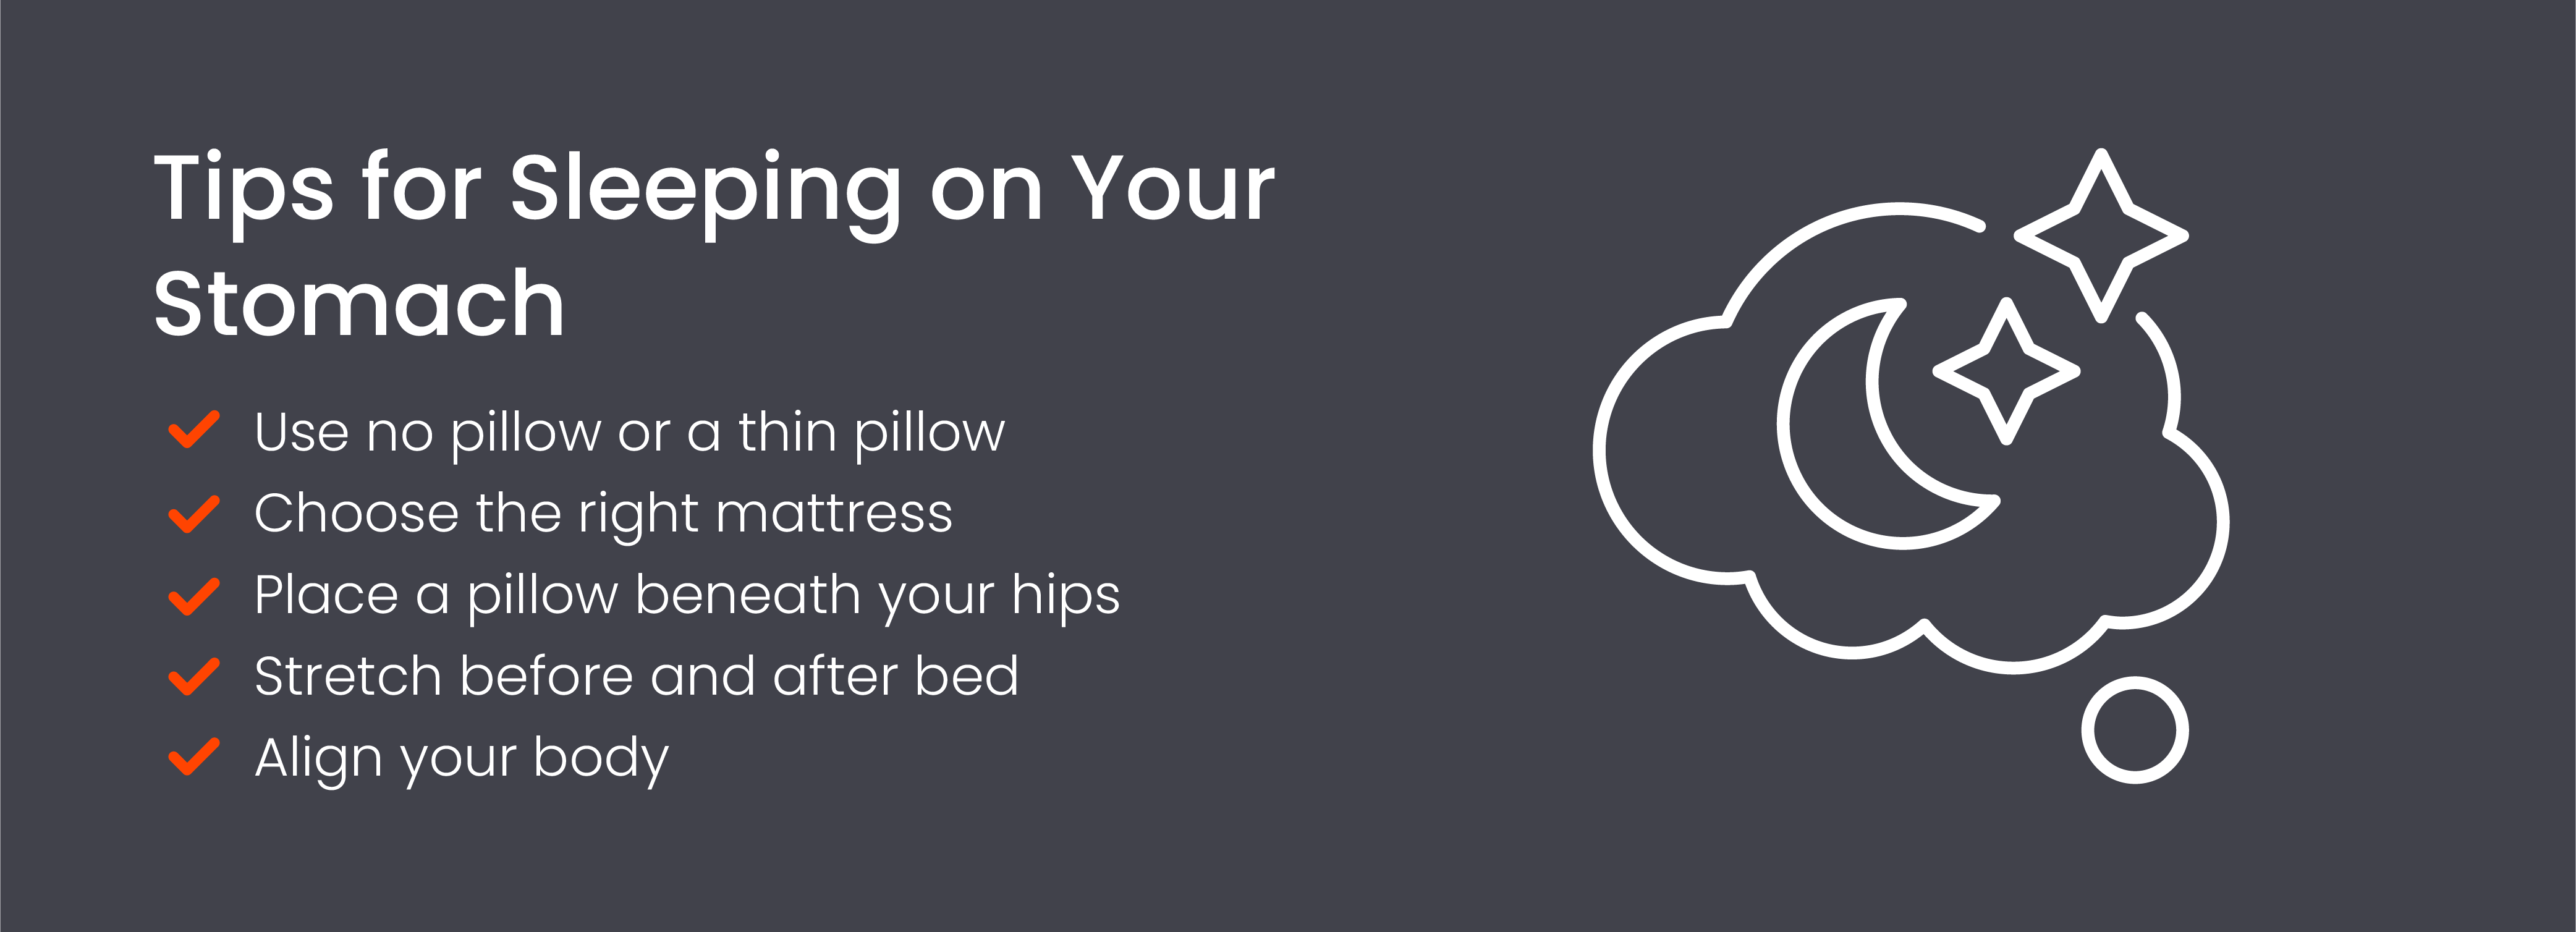 Tips for Sleeping on Your Stomach